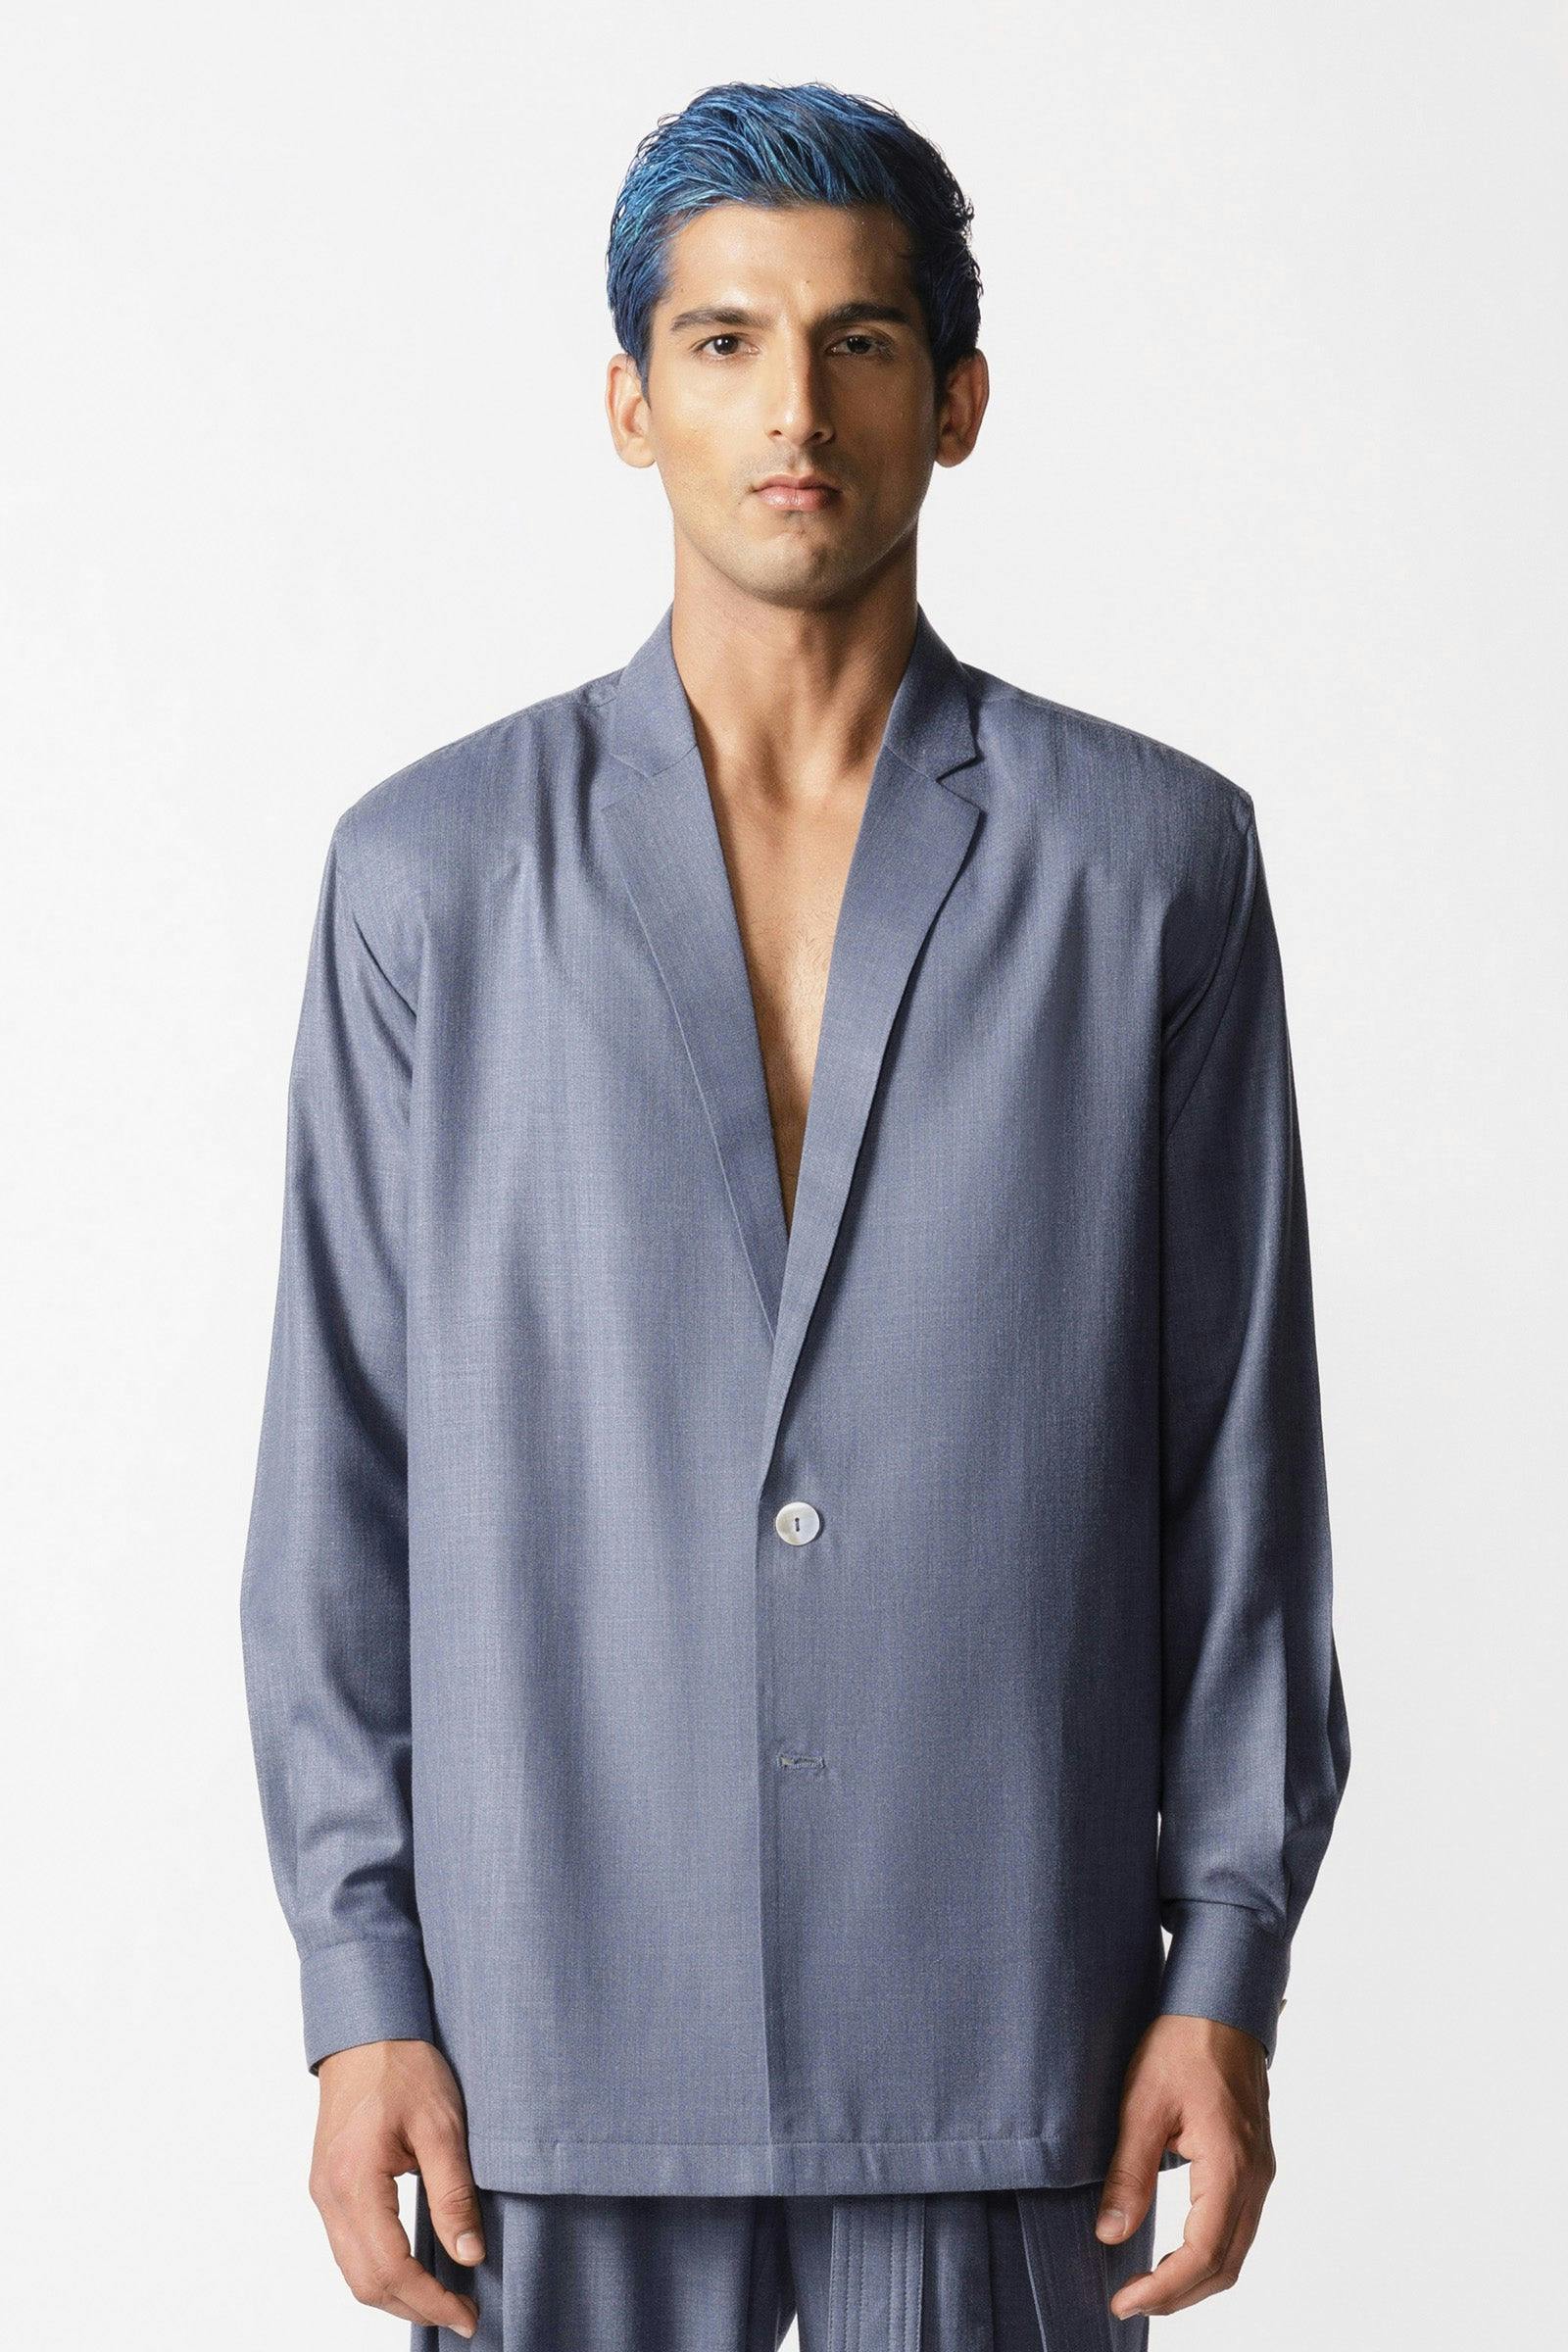 Oversized casual blazer, a product by Line Outline